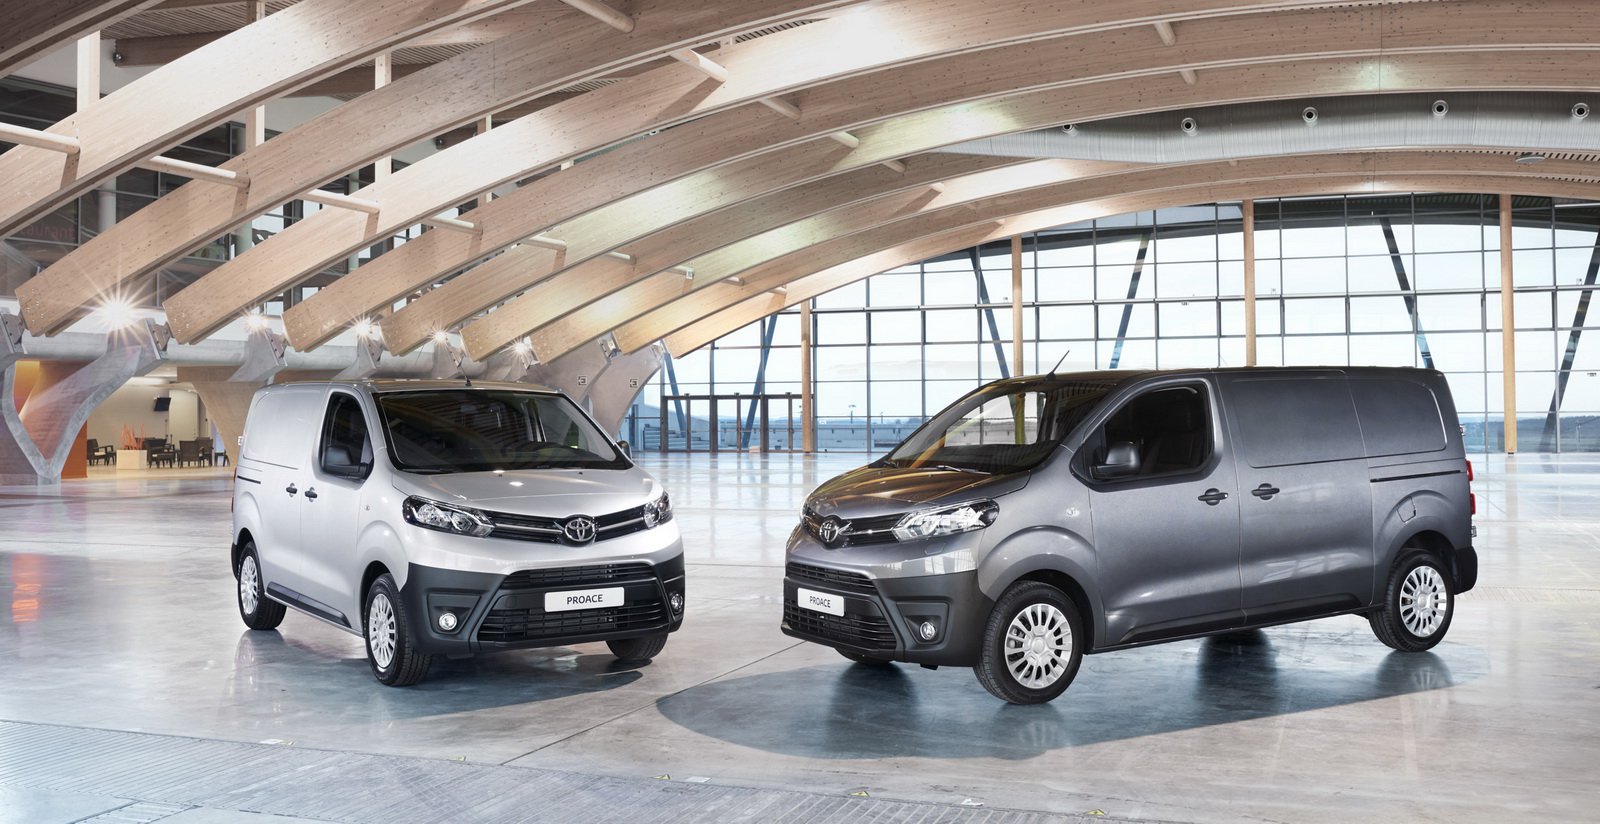 New Proace EV Scheduled For 2020 -